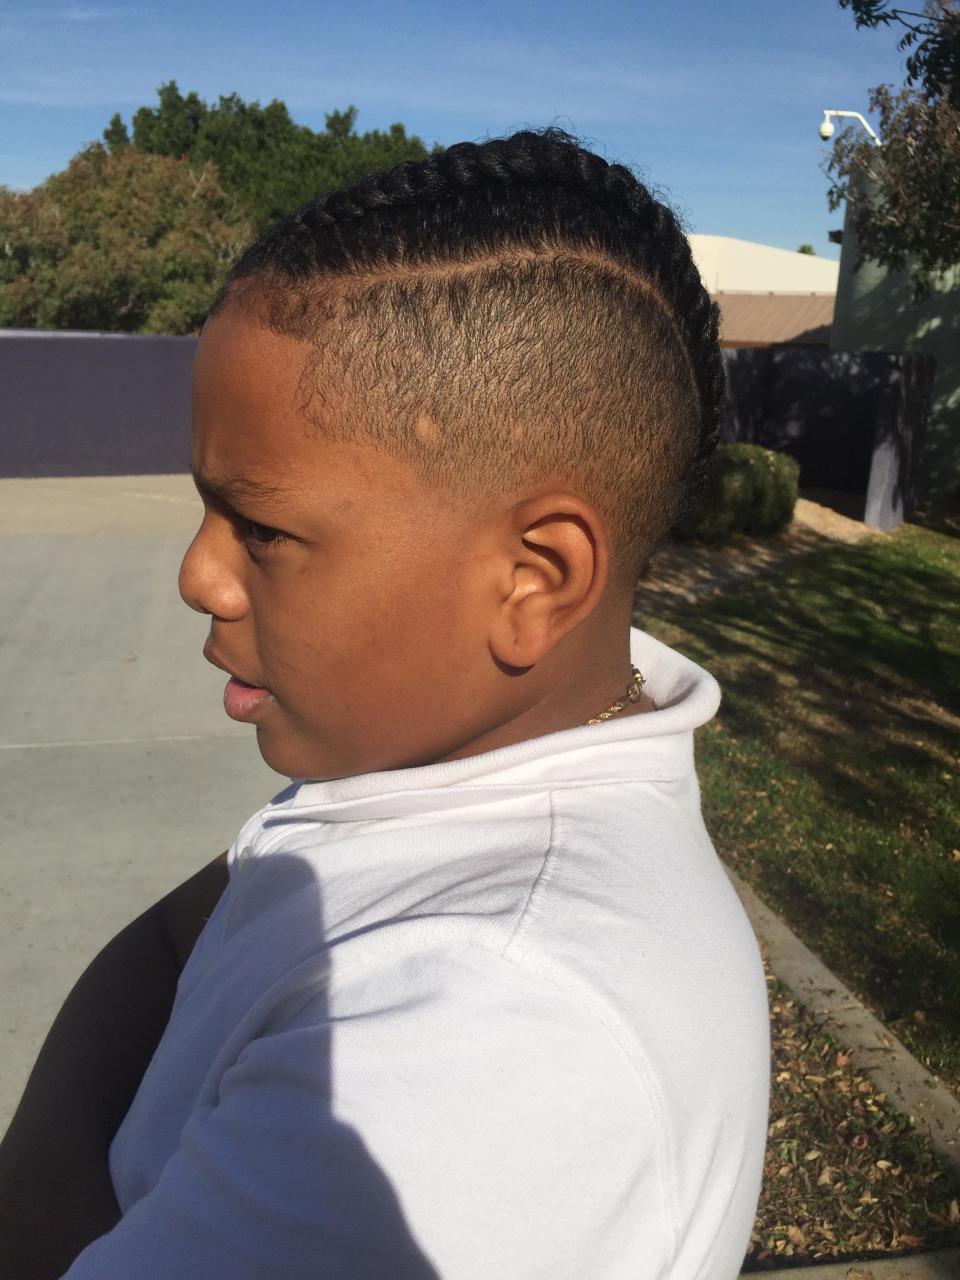 Nasir, 12, had been wearing his hair in braids for six months when his school objected, per its dress code. (Photo: Courtesy of Brittany Anderson)